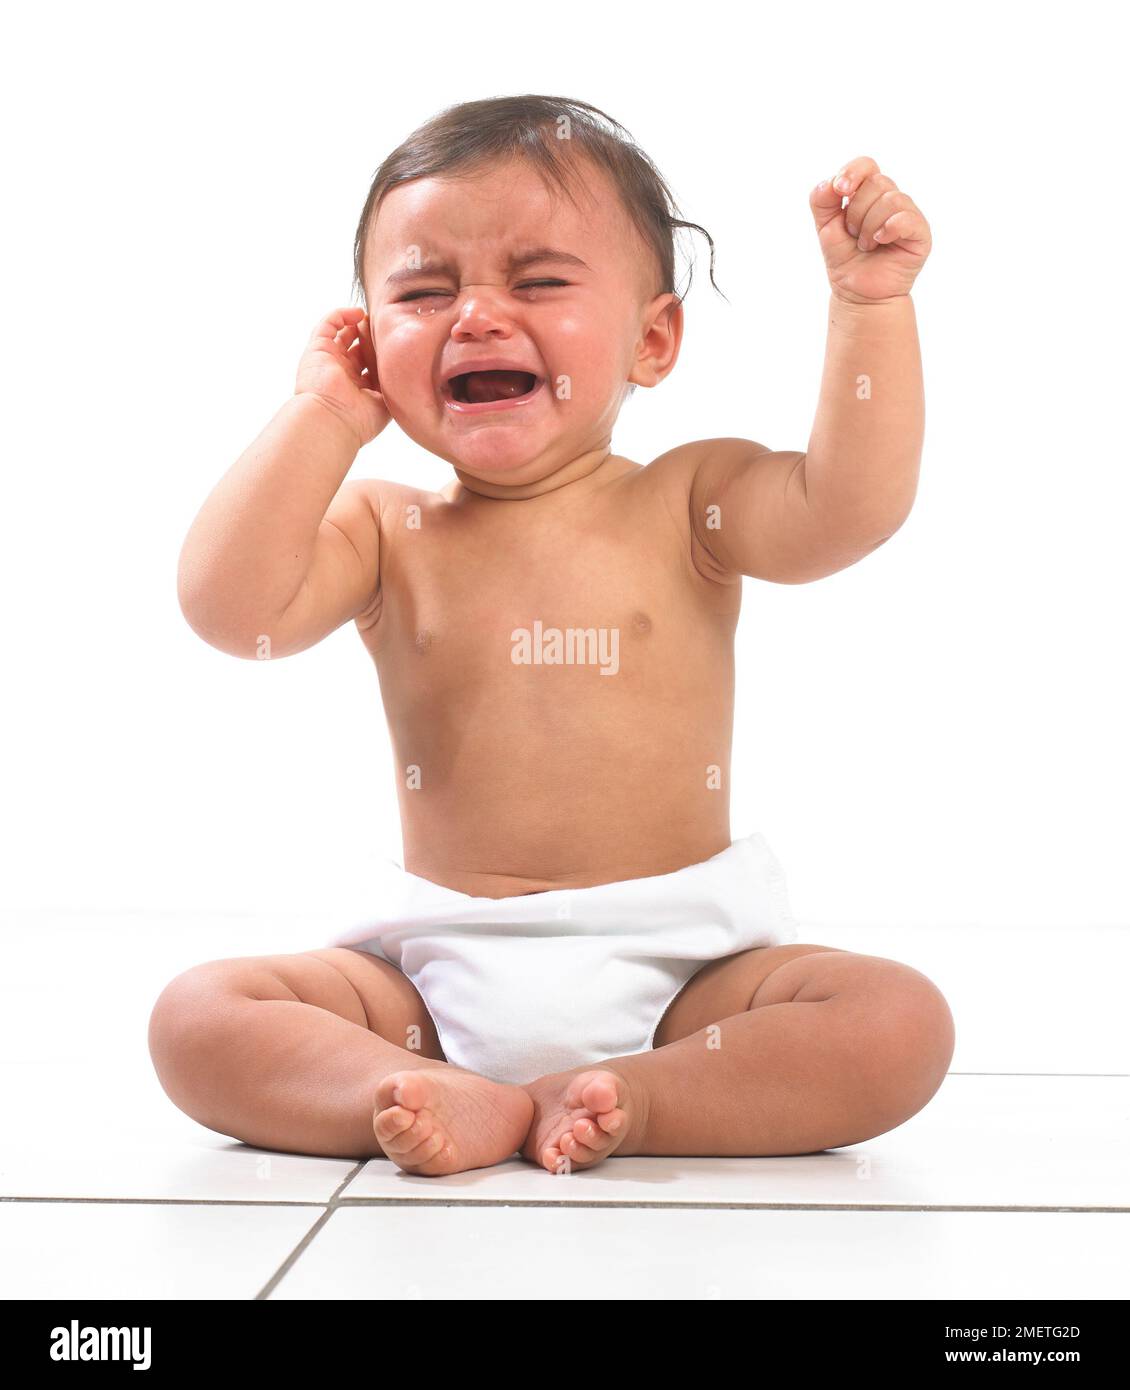 Baby girl sitting wearing nappy and crying, 7 months Stock Photo